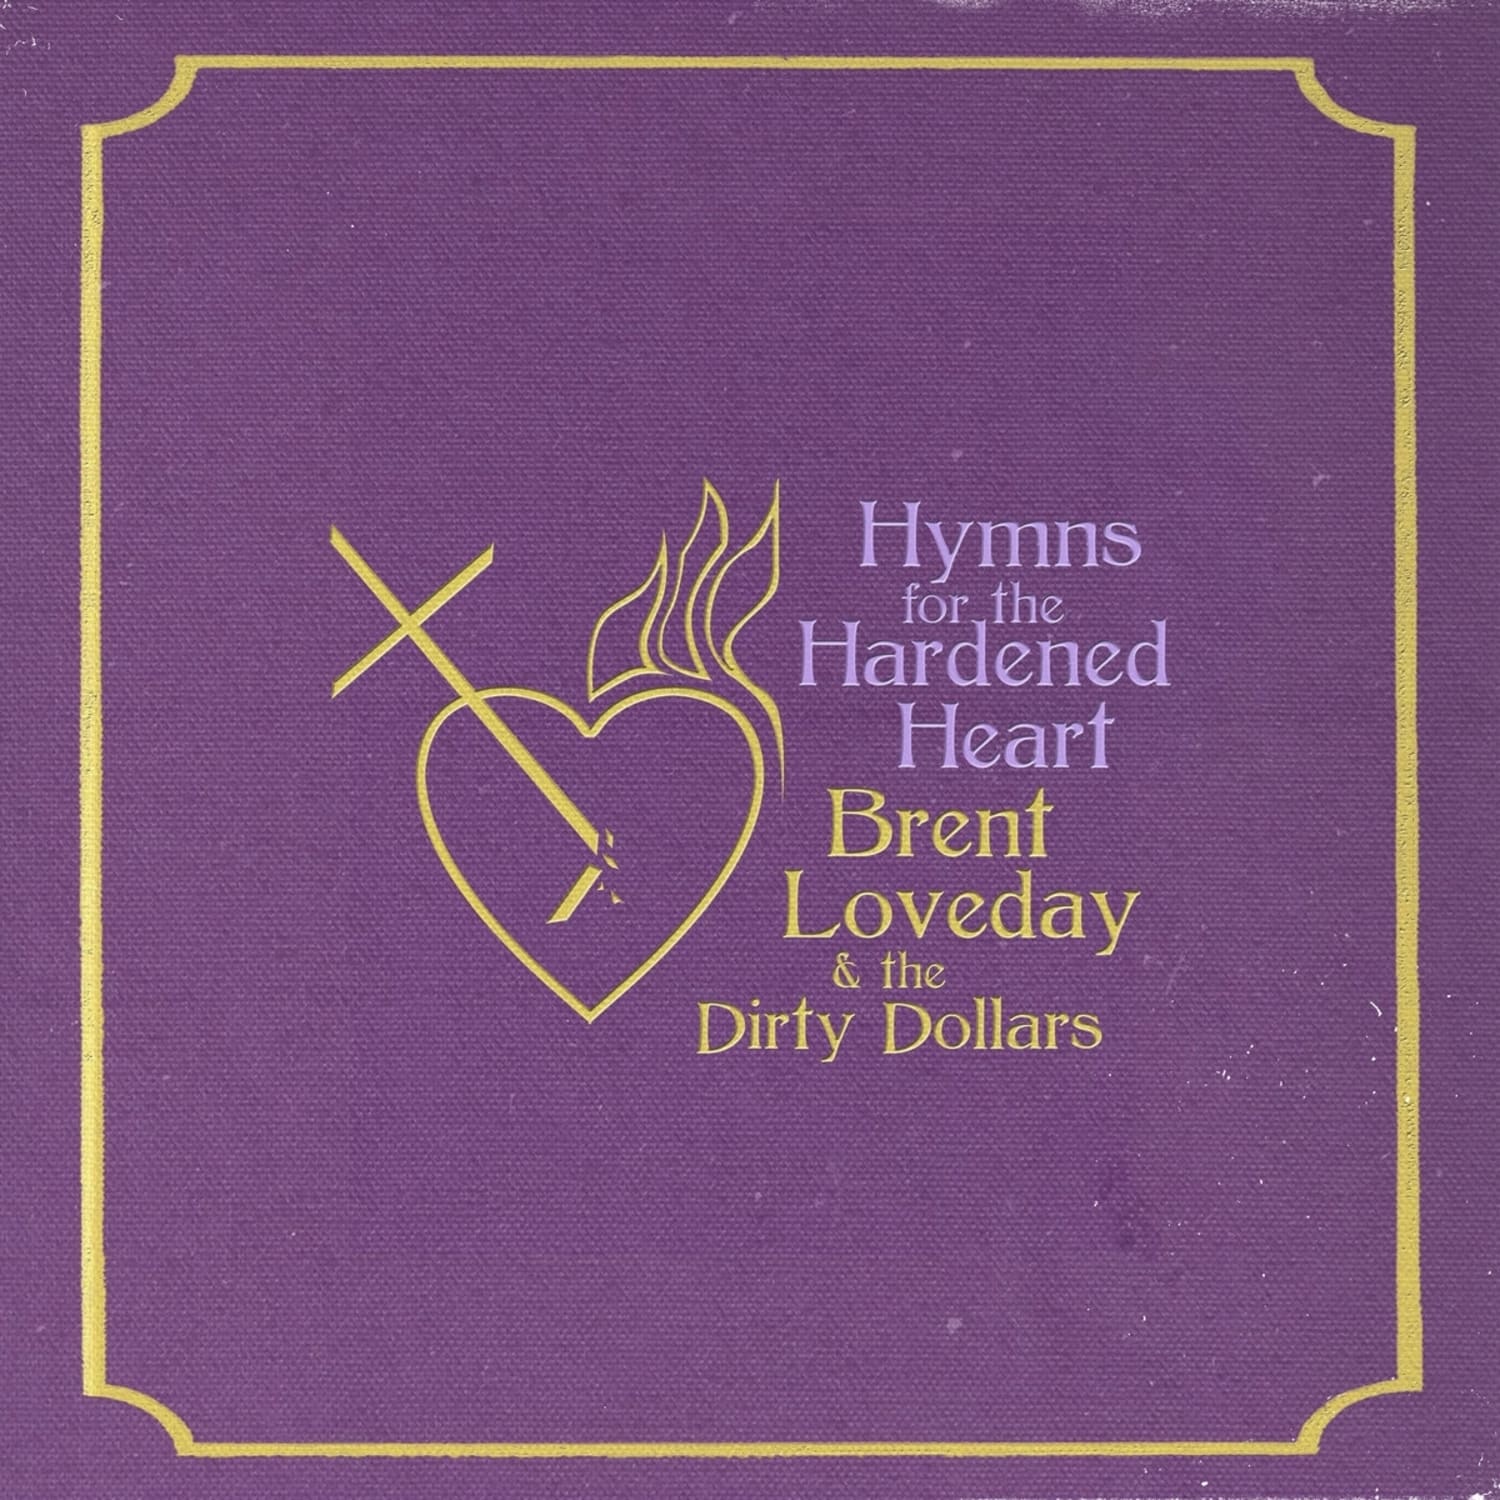  Brent Loveday & The Dirty Dollars - HYMNS FOR THE HARDENED HEART 